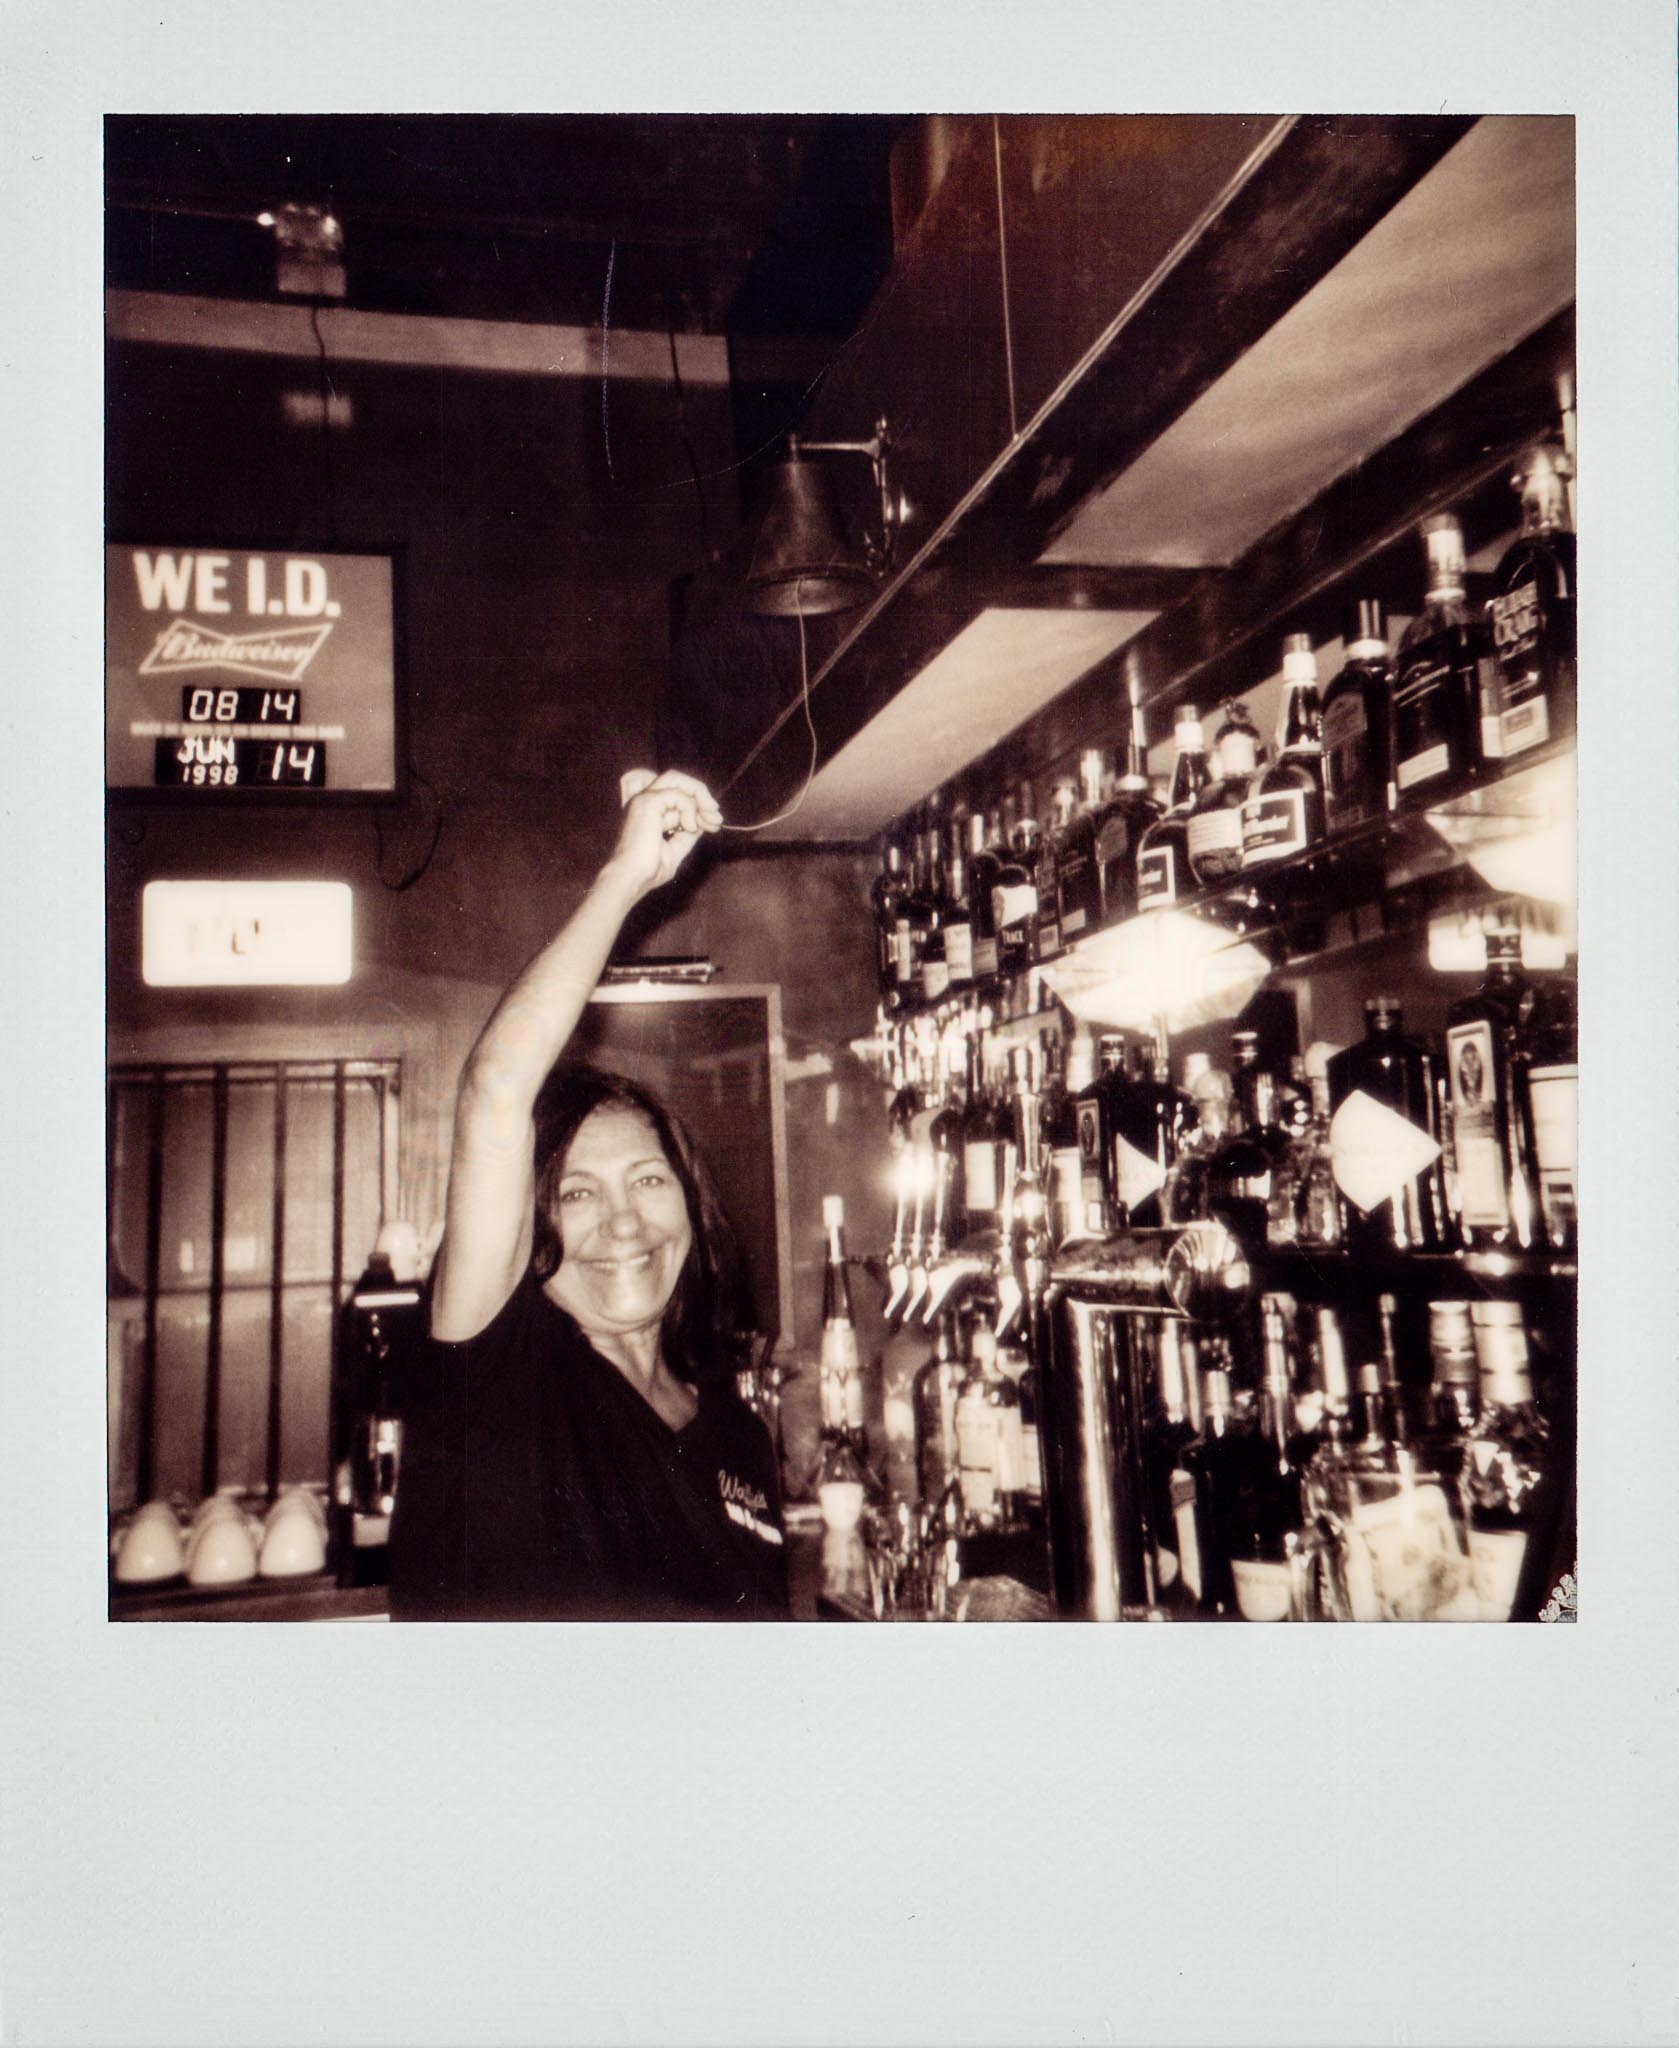 Cindy the bartender ringing the bell at Wallys Mills Avenue Liquors